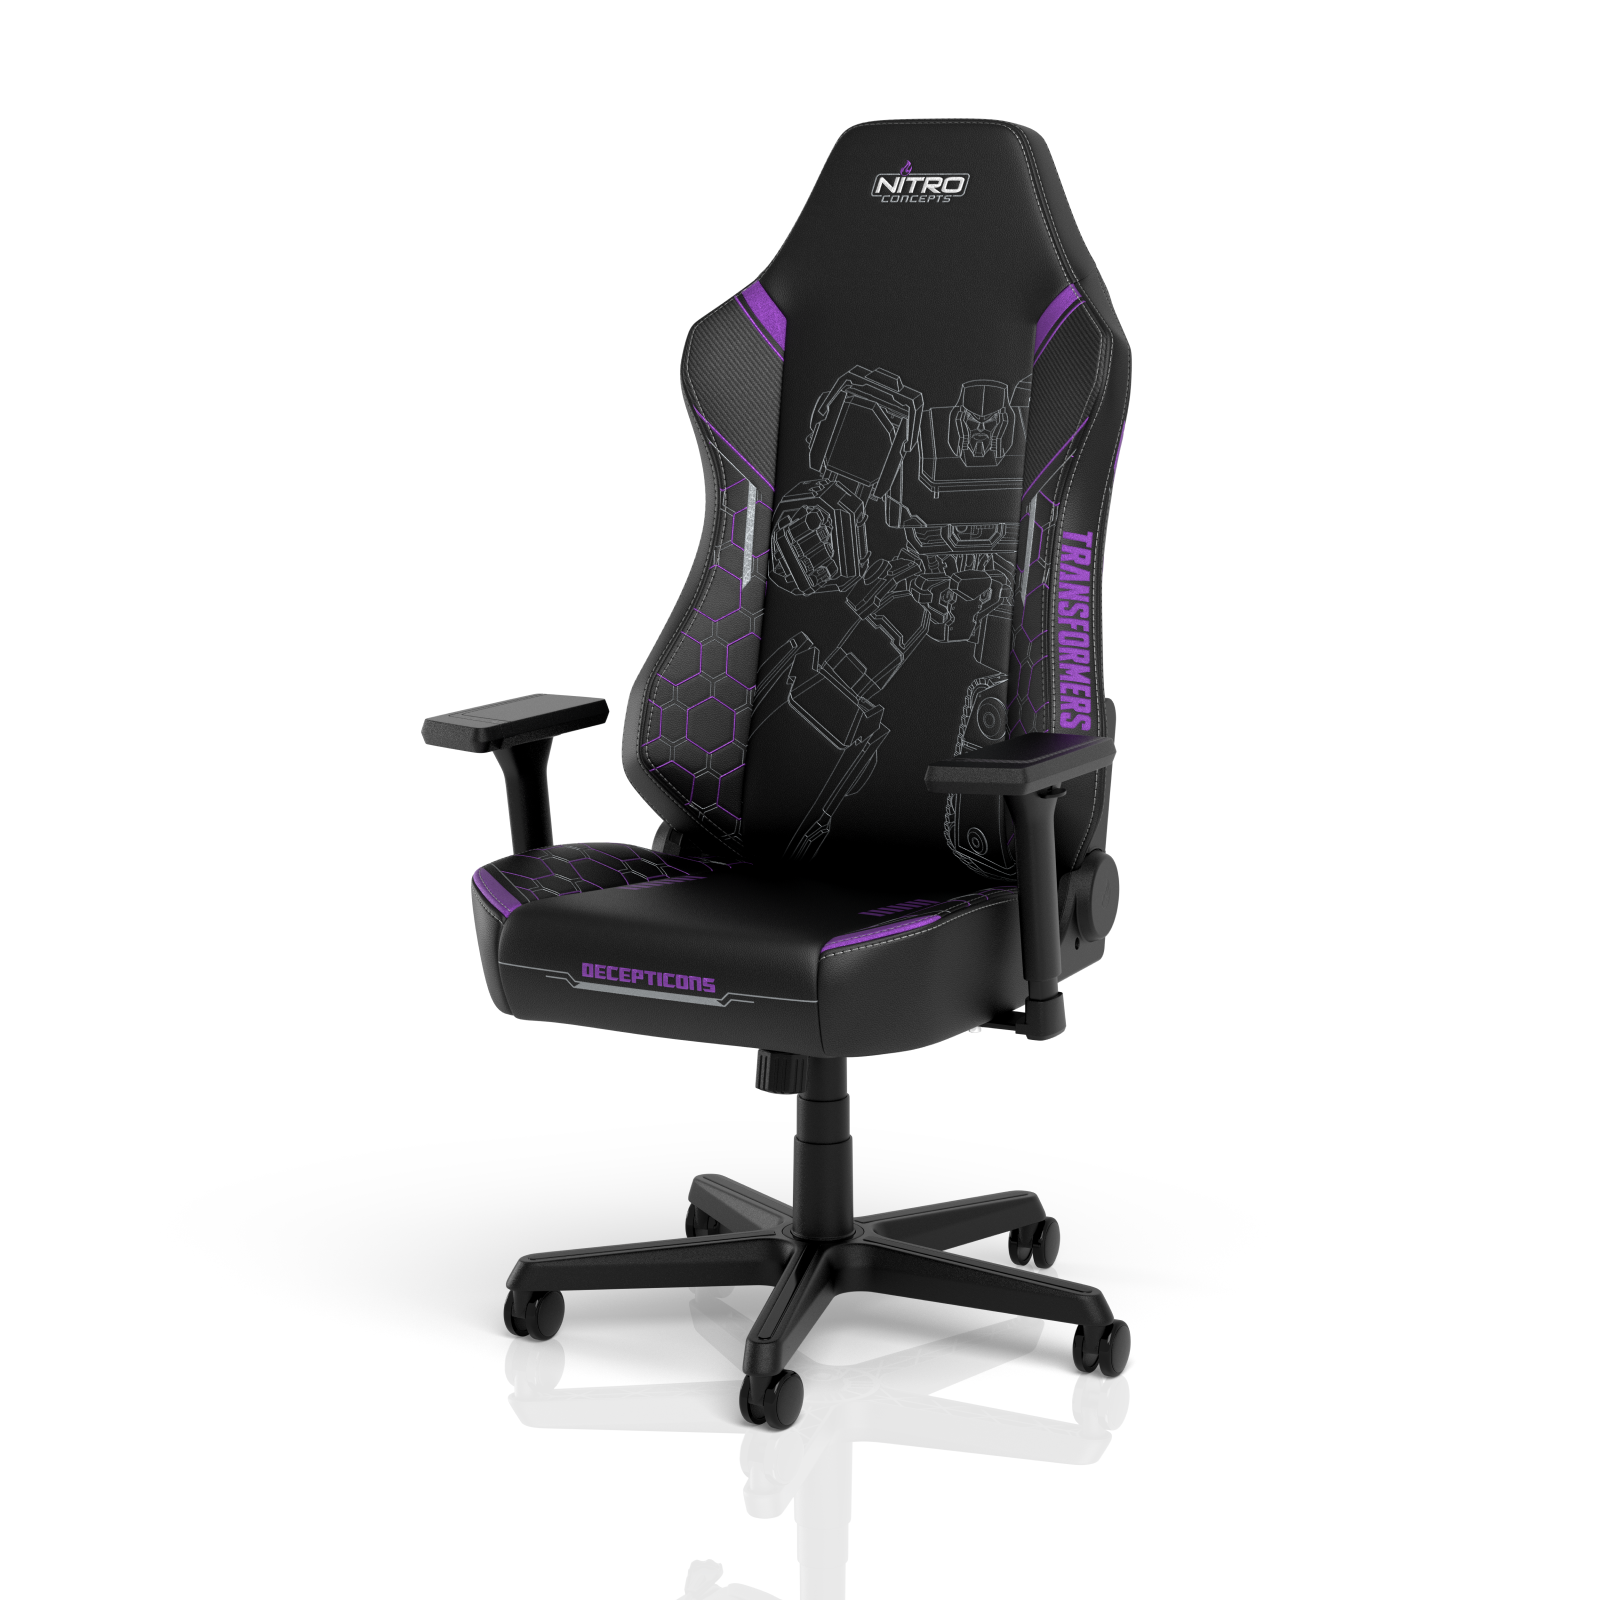 Nitro Concepts X1000 Gaming Chair Transformers Decepticons Edition